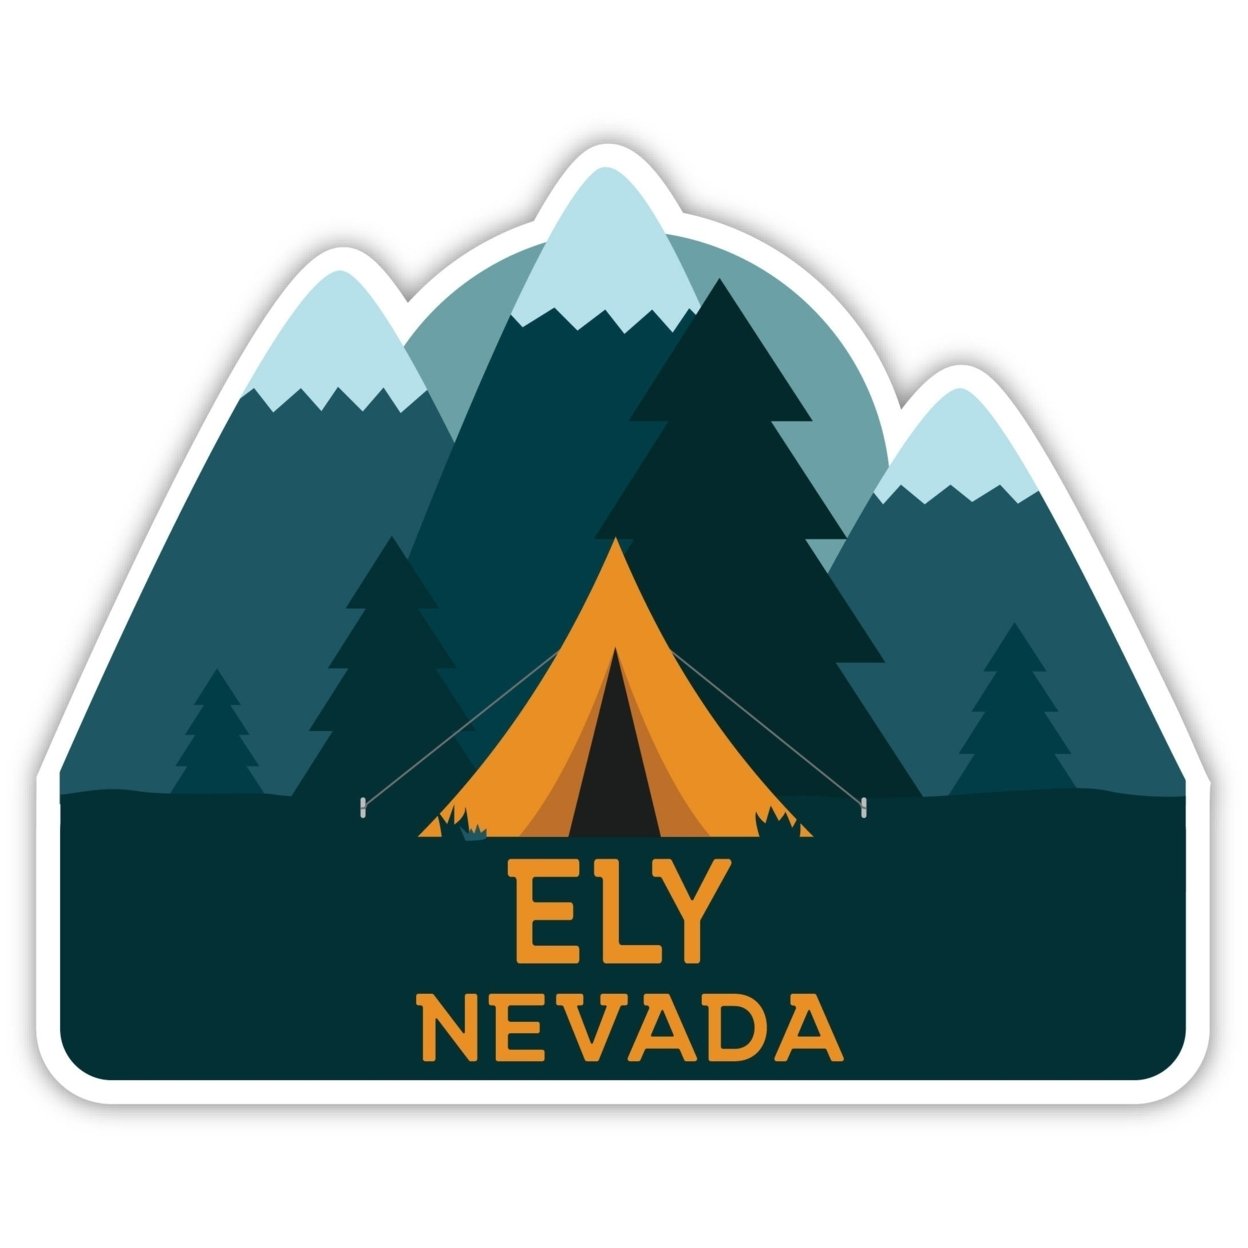 Ely Nevada Souvenir Decorative Stickers (Choose Theme And Size) - 4-Pack, 12-Inch, Great Outdoors